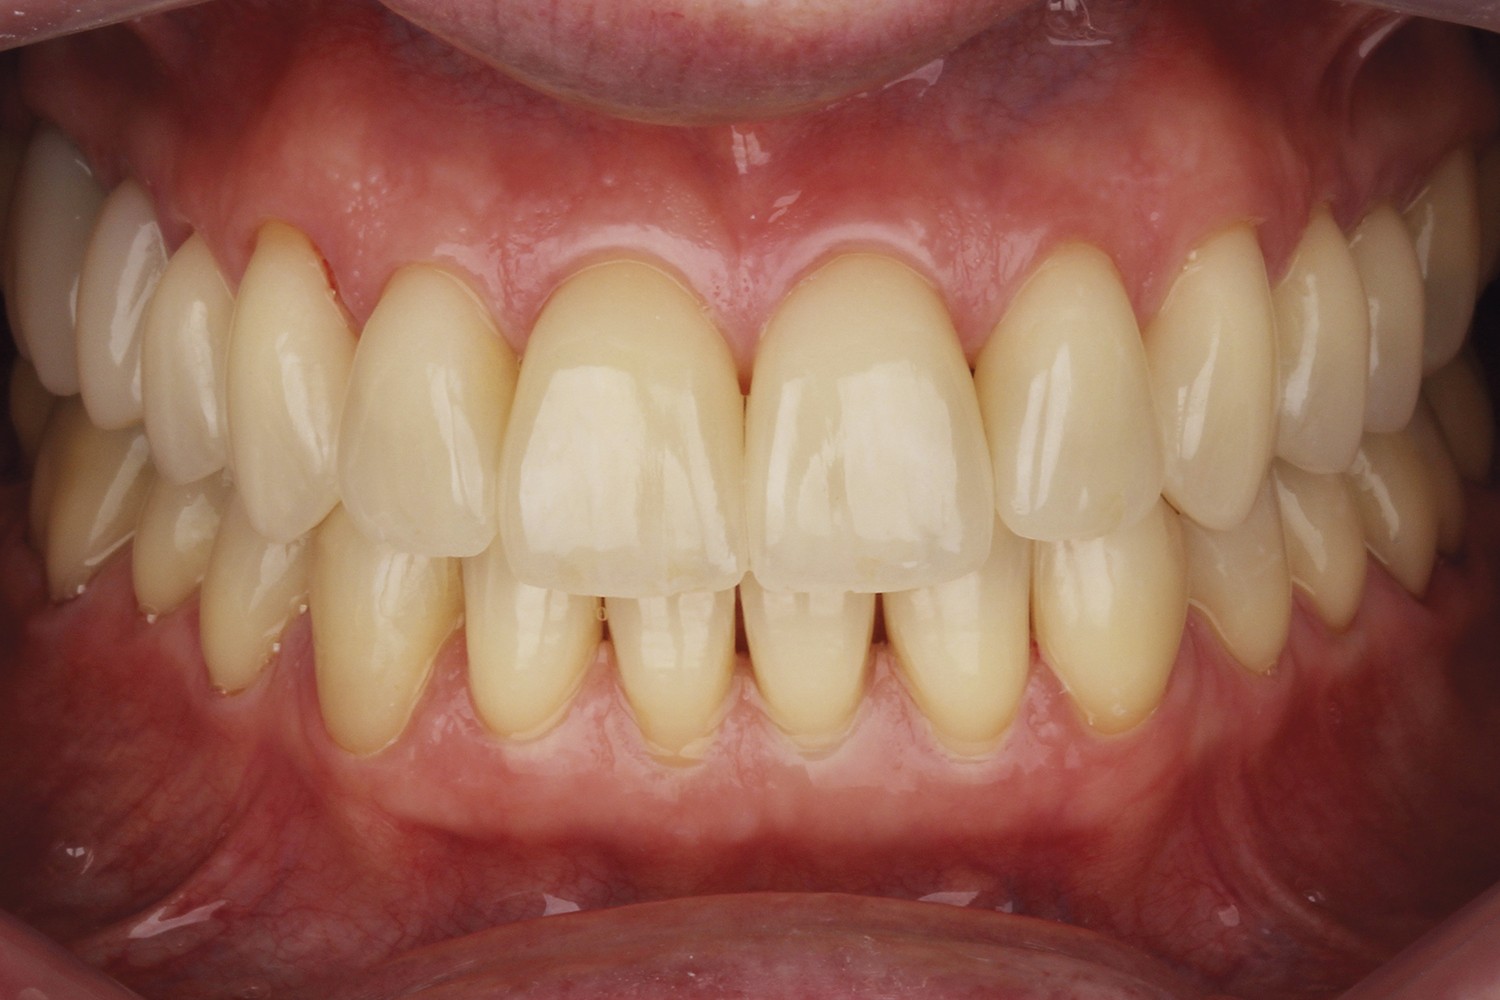 Natural enamel and dentin replacement technique with the 2 and 2 Concept